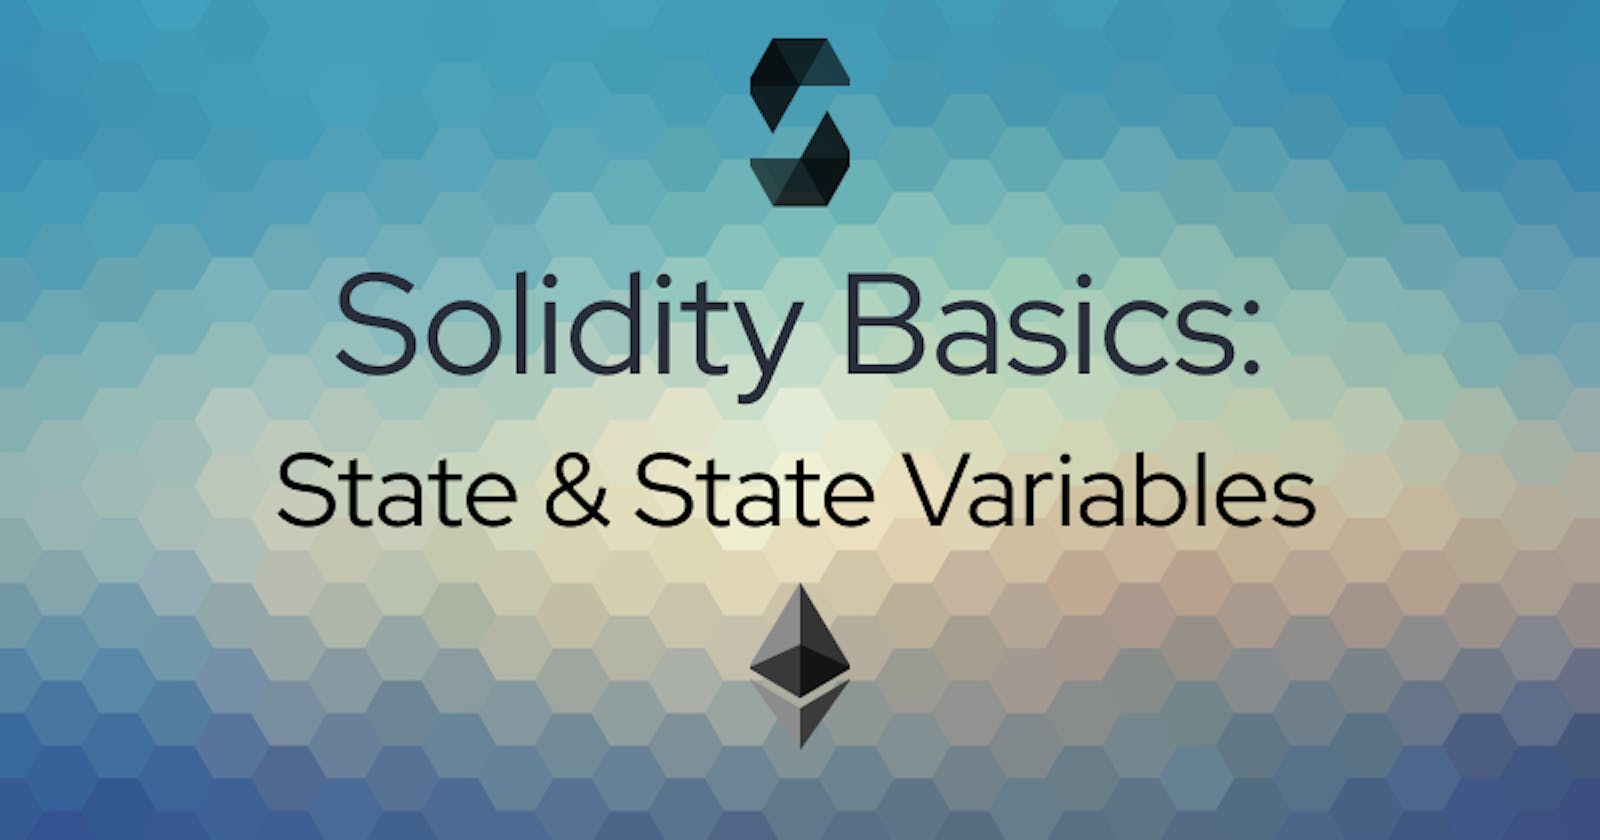 Solidity Basics: State & State Variables